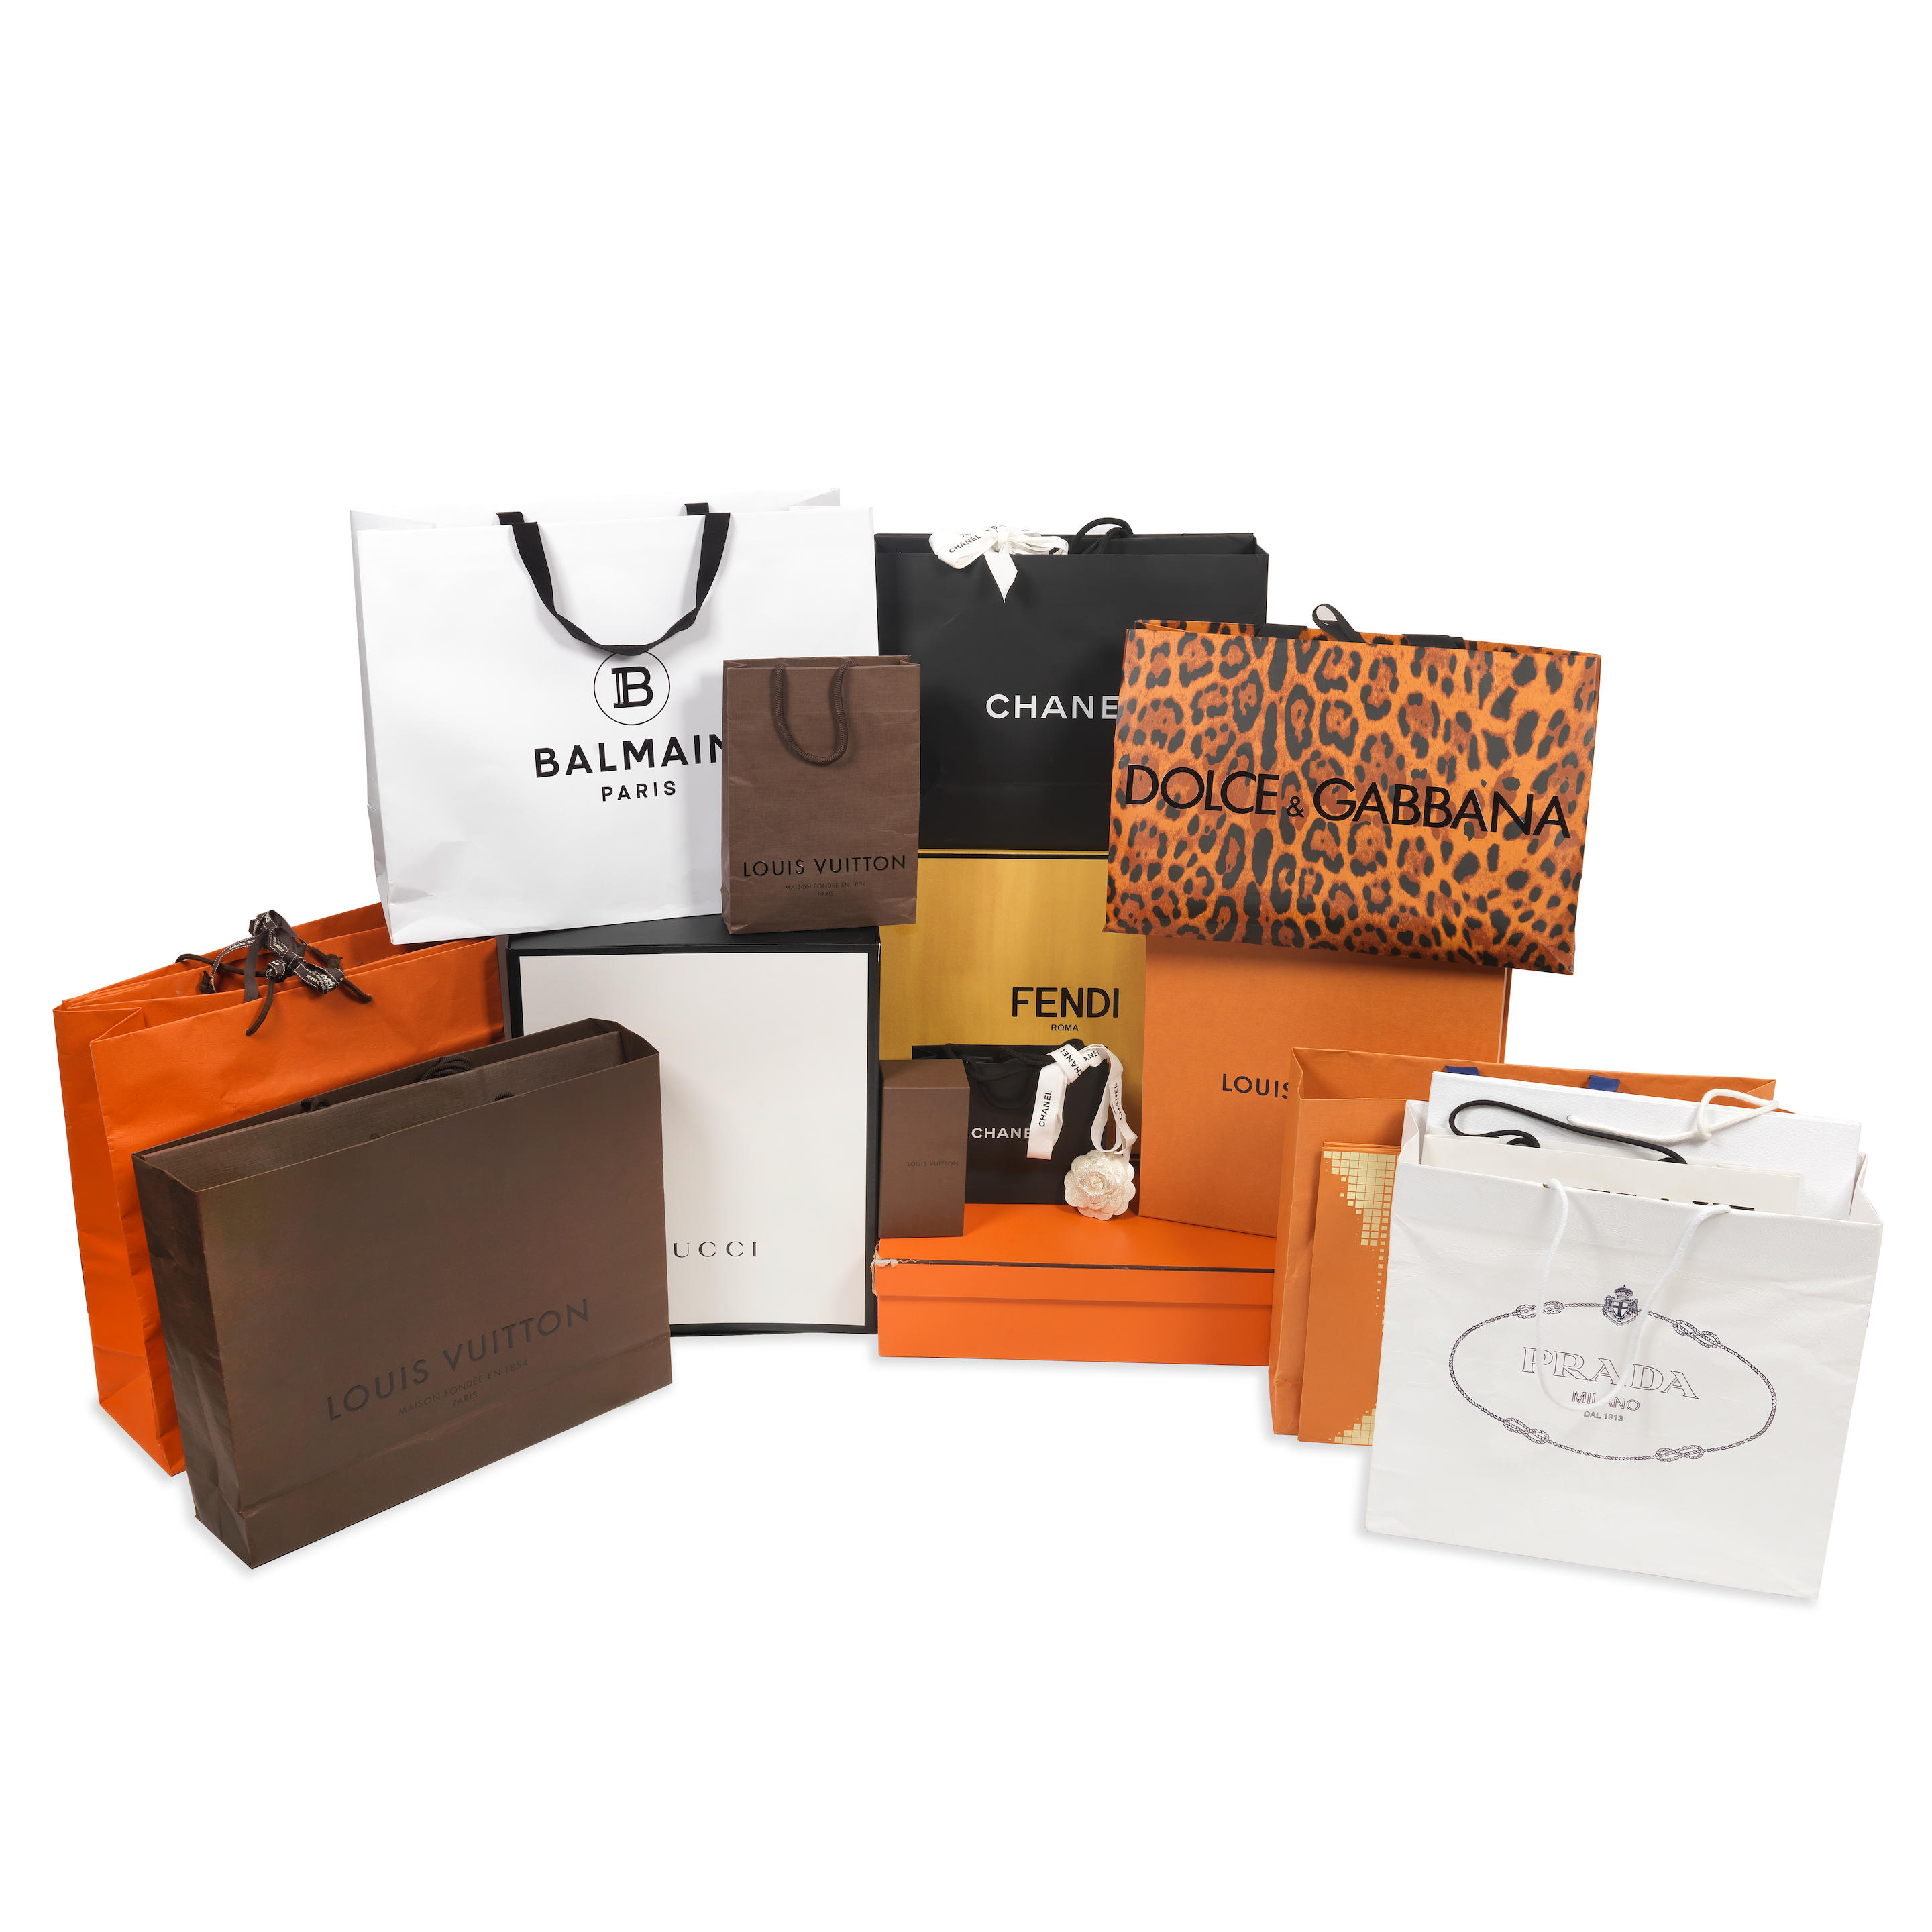 Sold at Auction: LARGE GROUPING OF DESIGNER BOXES & SHOPPING BAGS